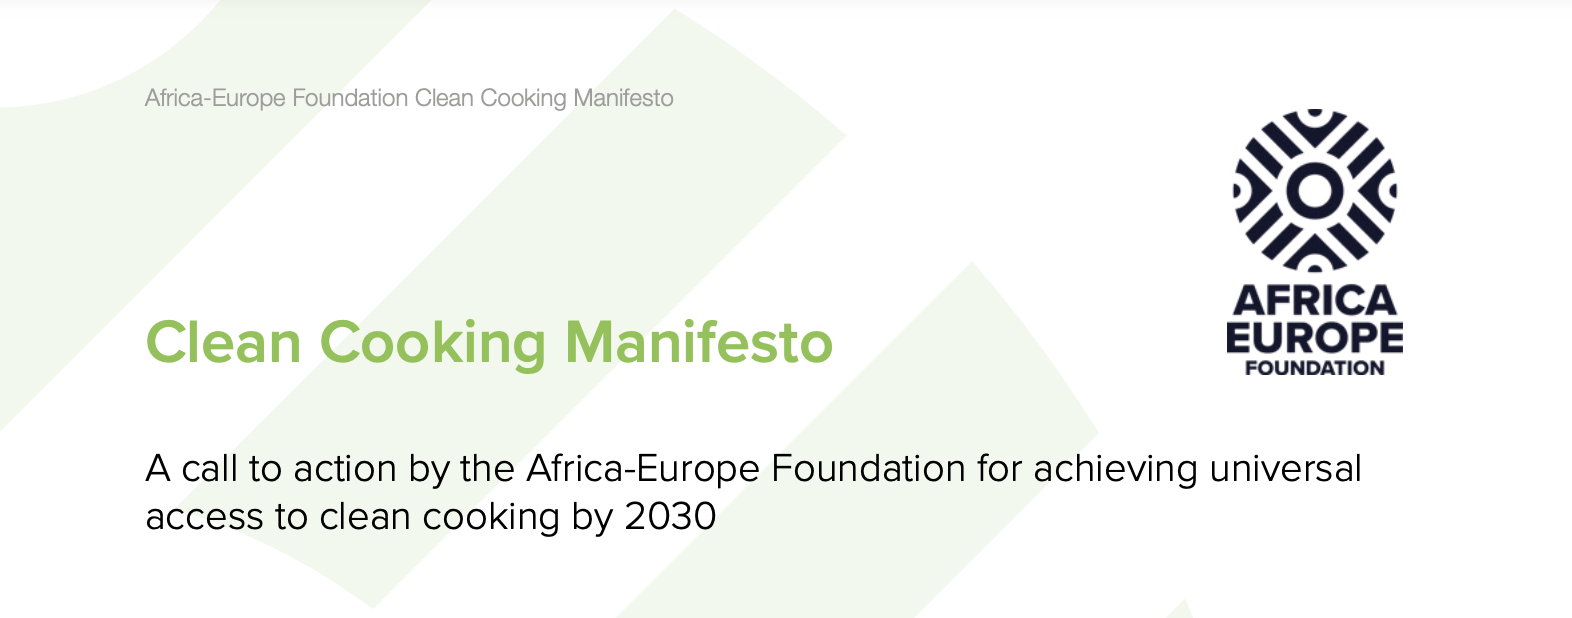 ENERGIA supports the Africa-Europe Foundation Clean Cooking Manifesto